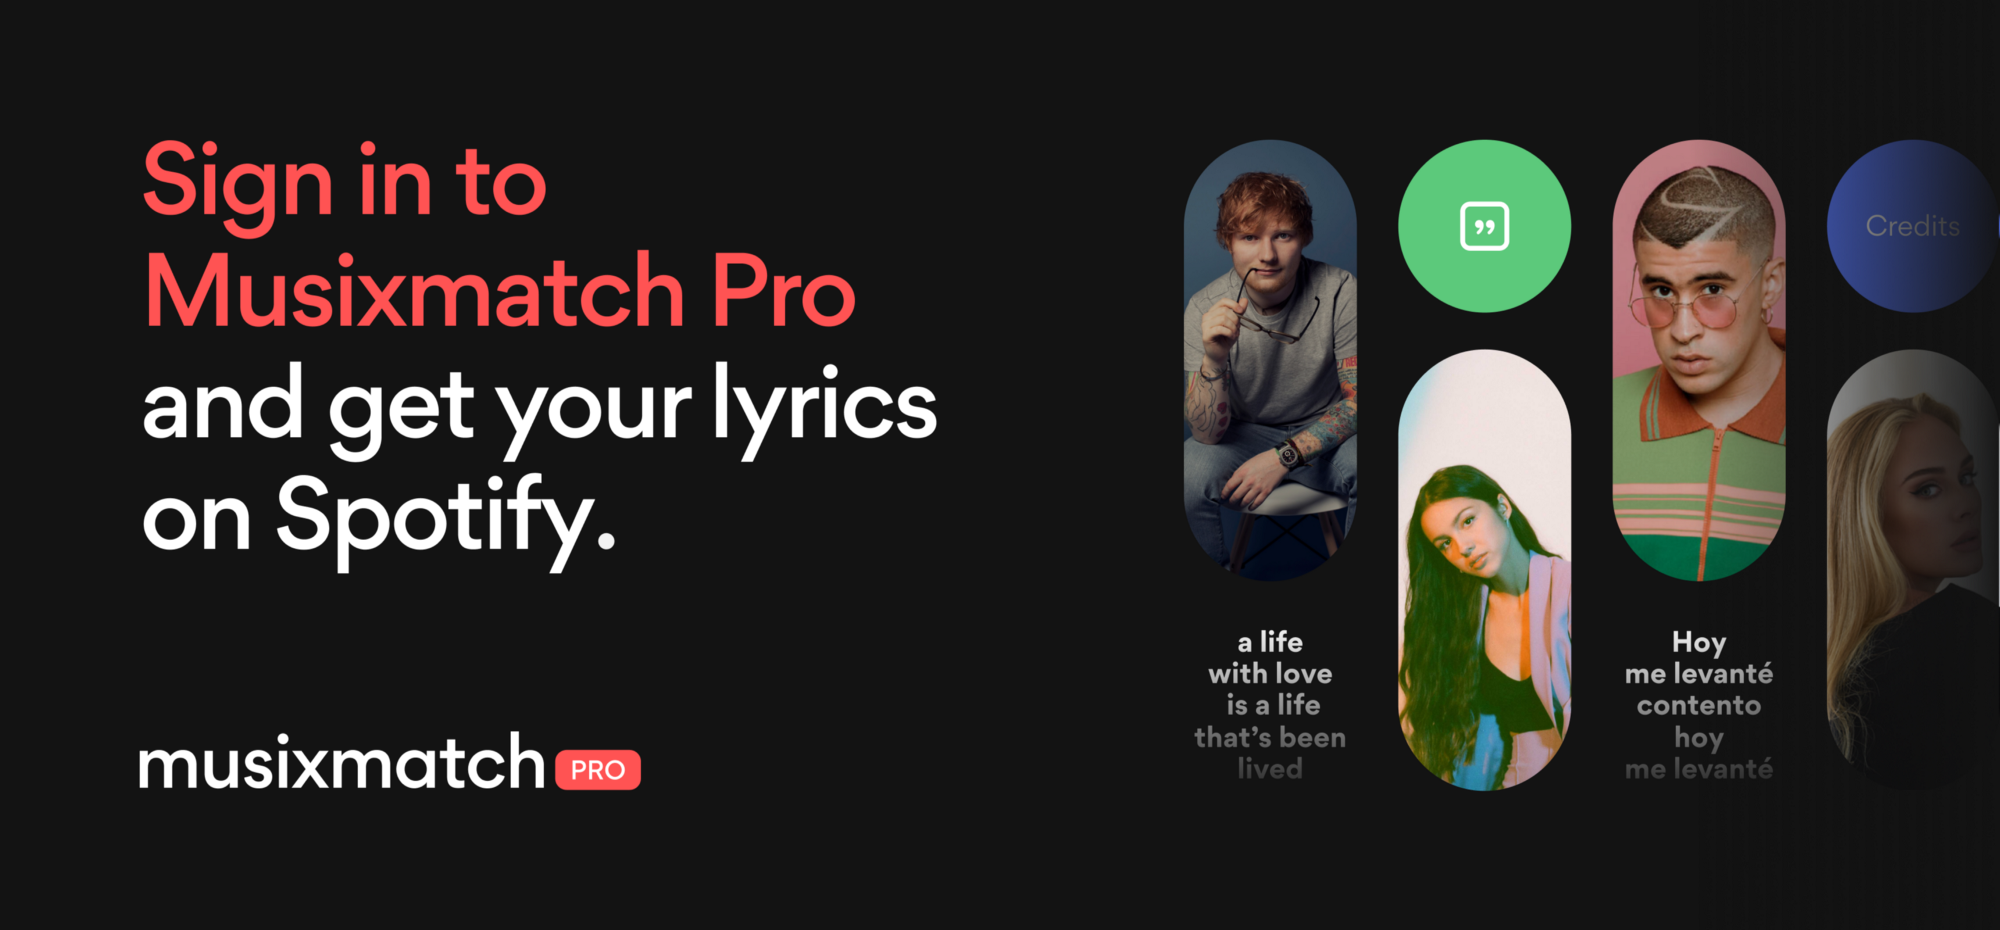 How to get your lyrics on Spotify